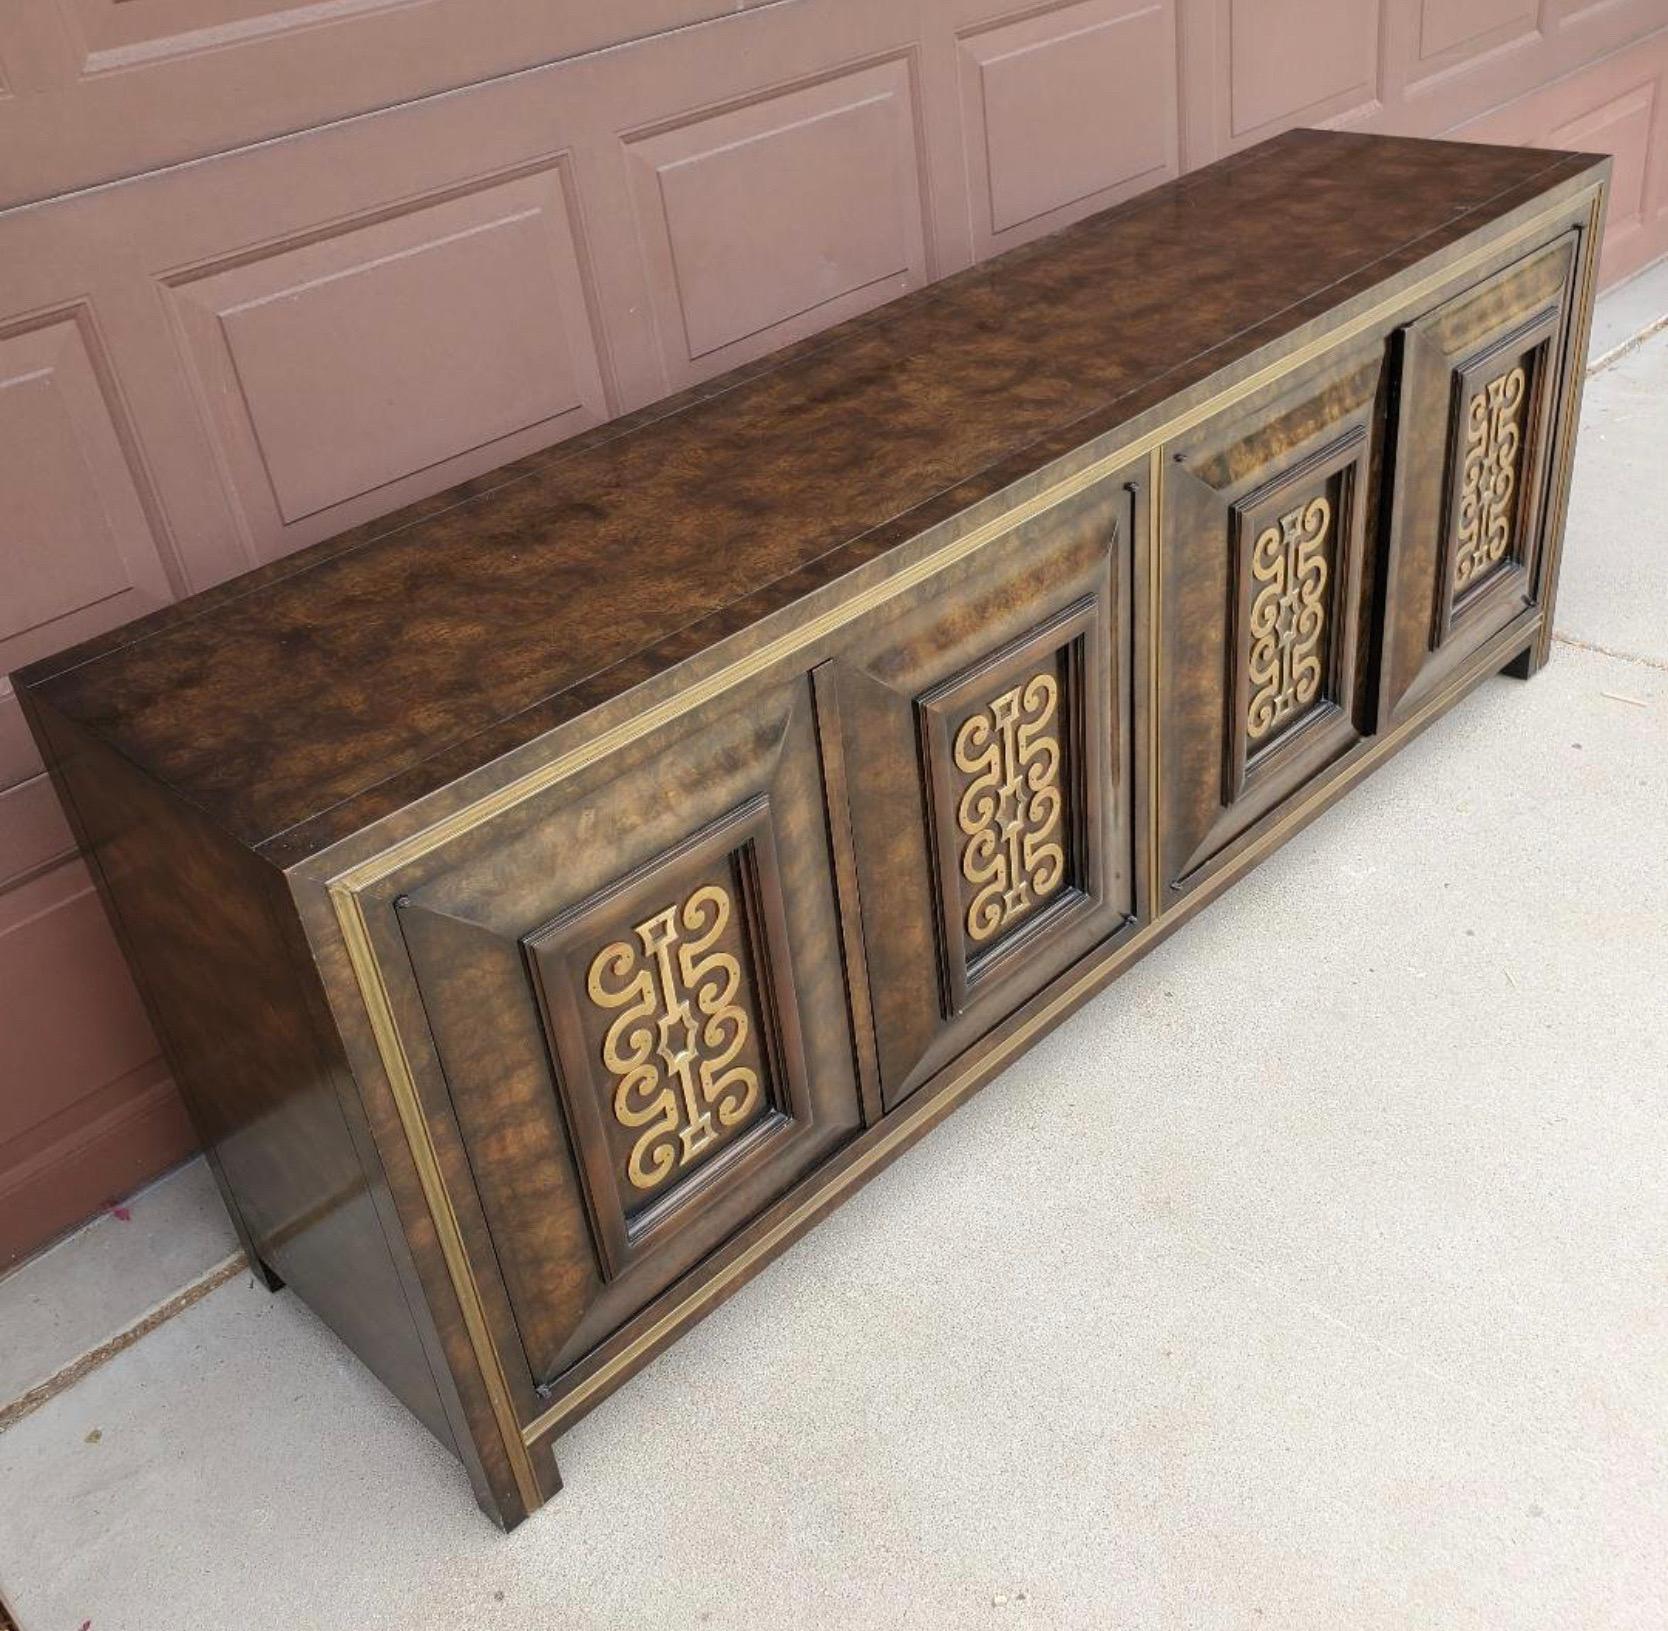 Spectacular Example of this Regency Burled Credenza/Buffet from famed Mastercraft. Impeccable Brass work inset into the four Burled doors like only Mastercraft can do. Beautiful William Deozema Design. Stunning piece.

Condition Disclosure:
Please